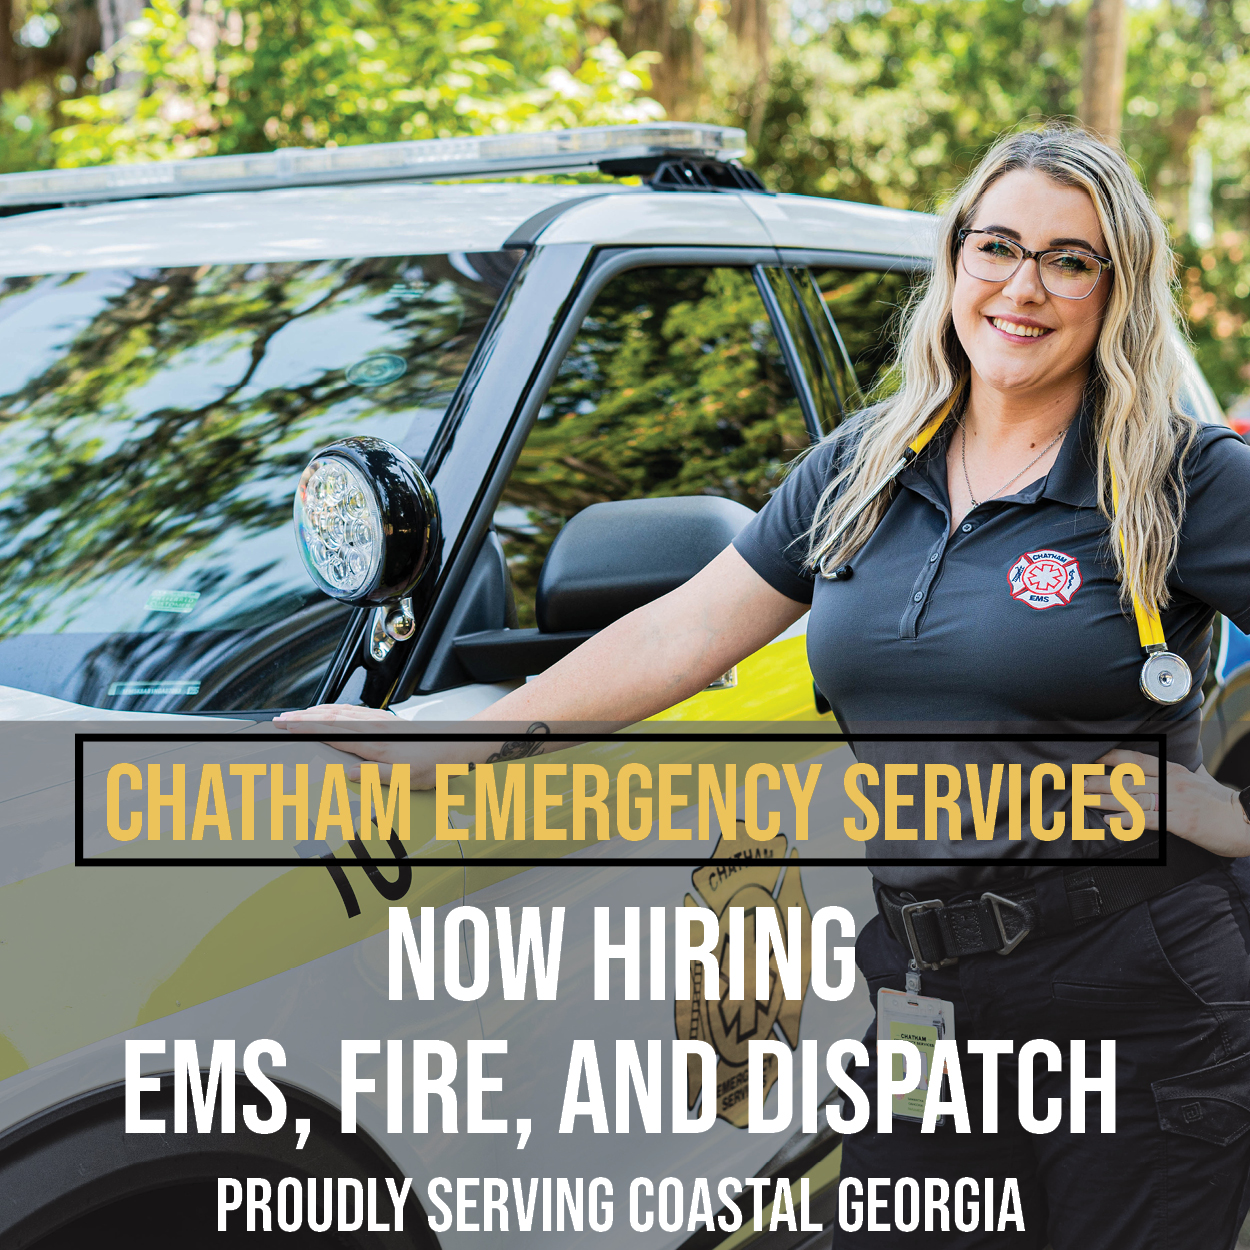 Chatham Emergency Services